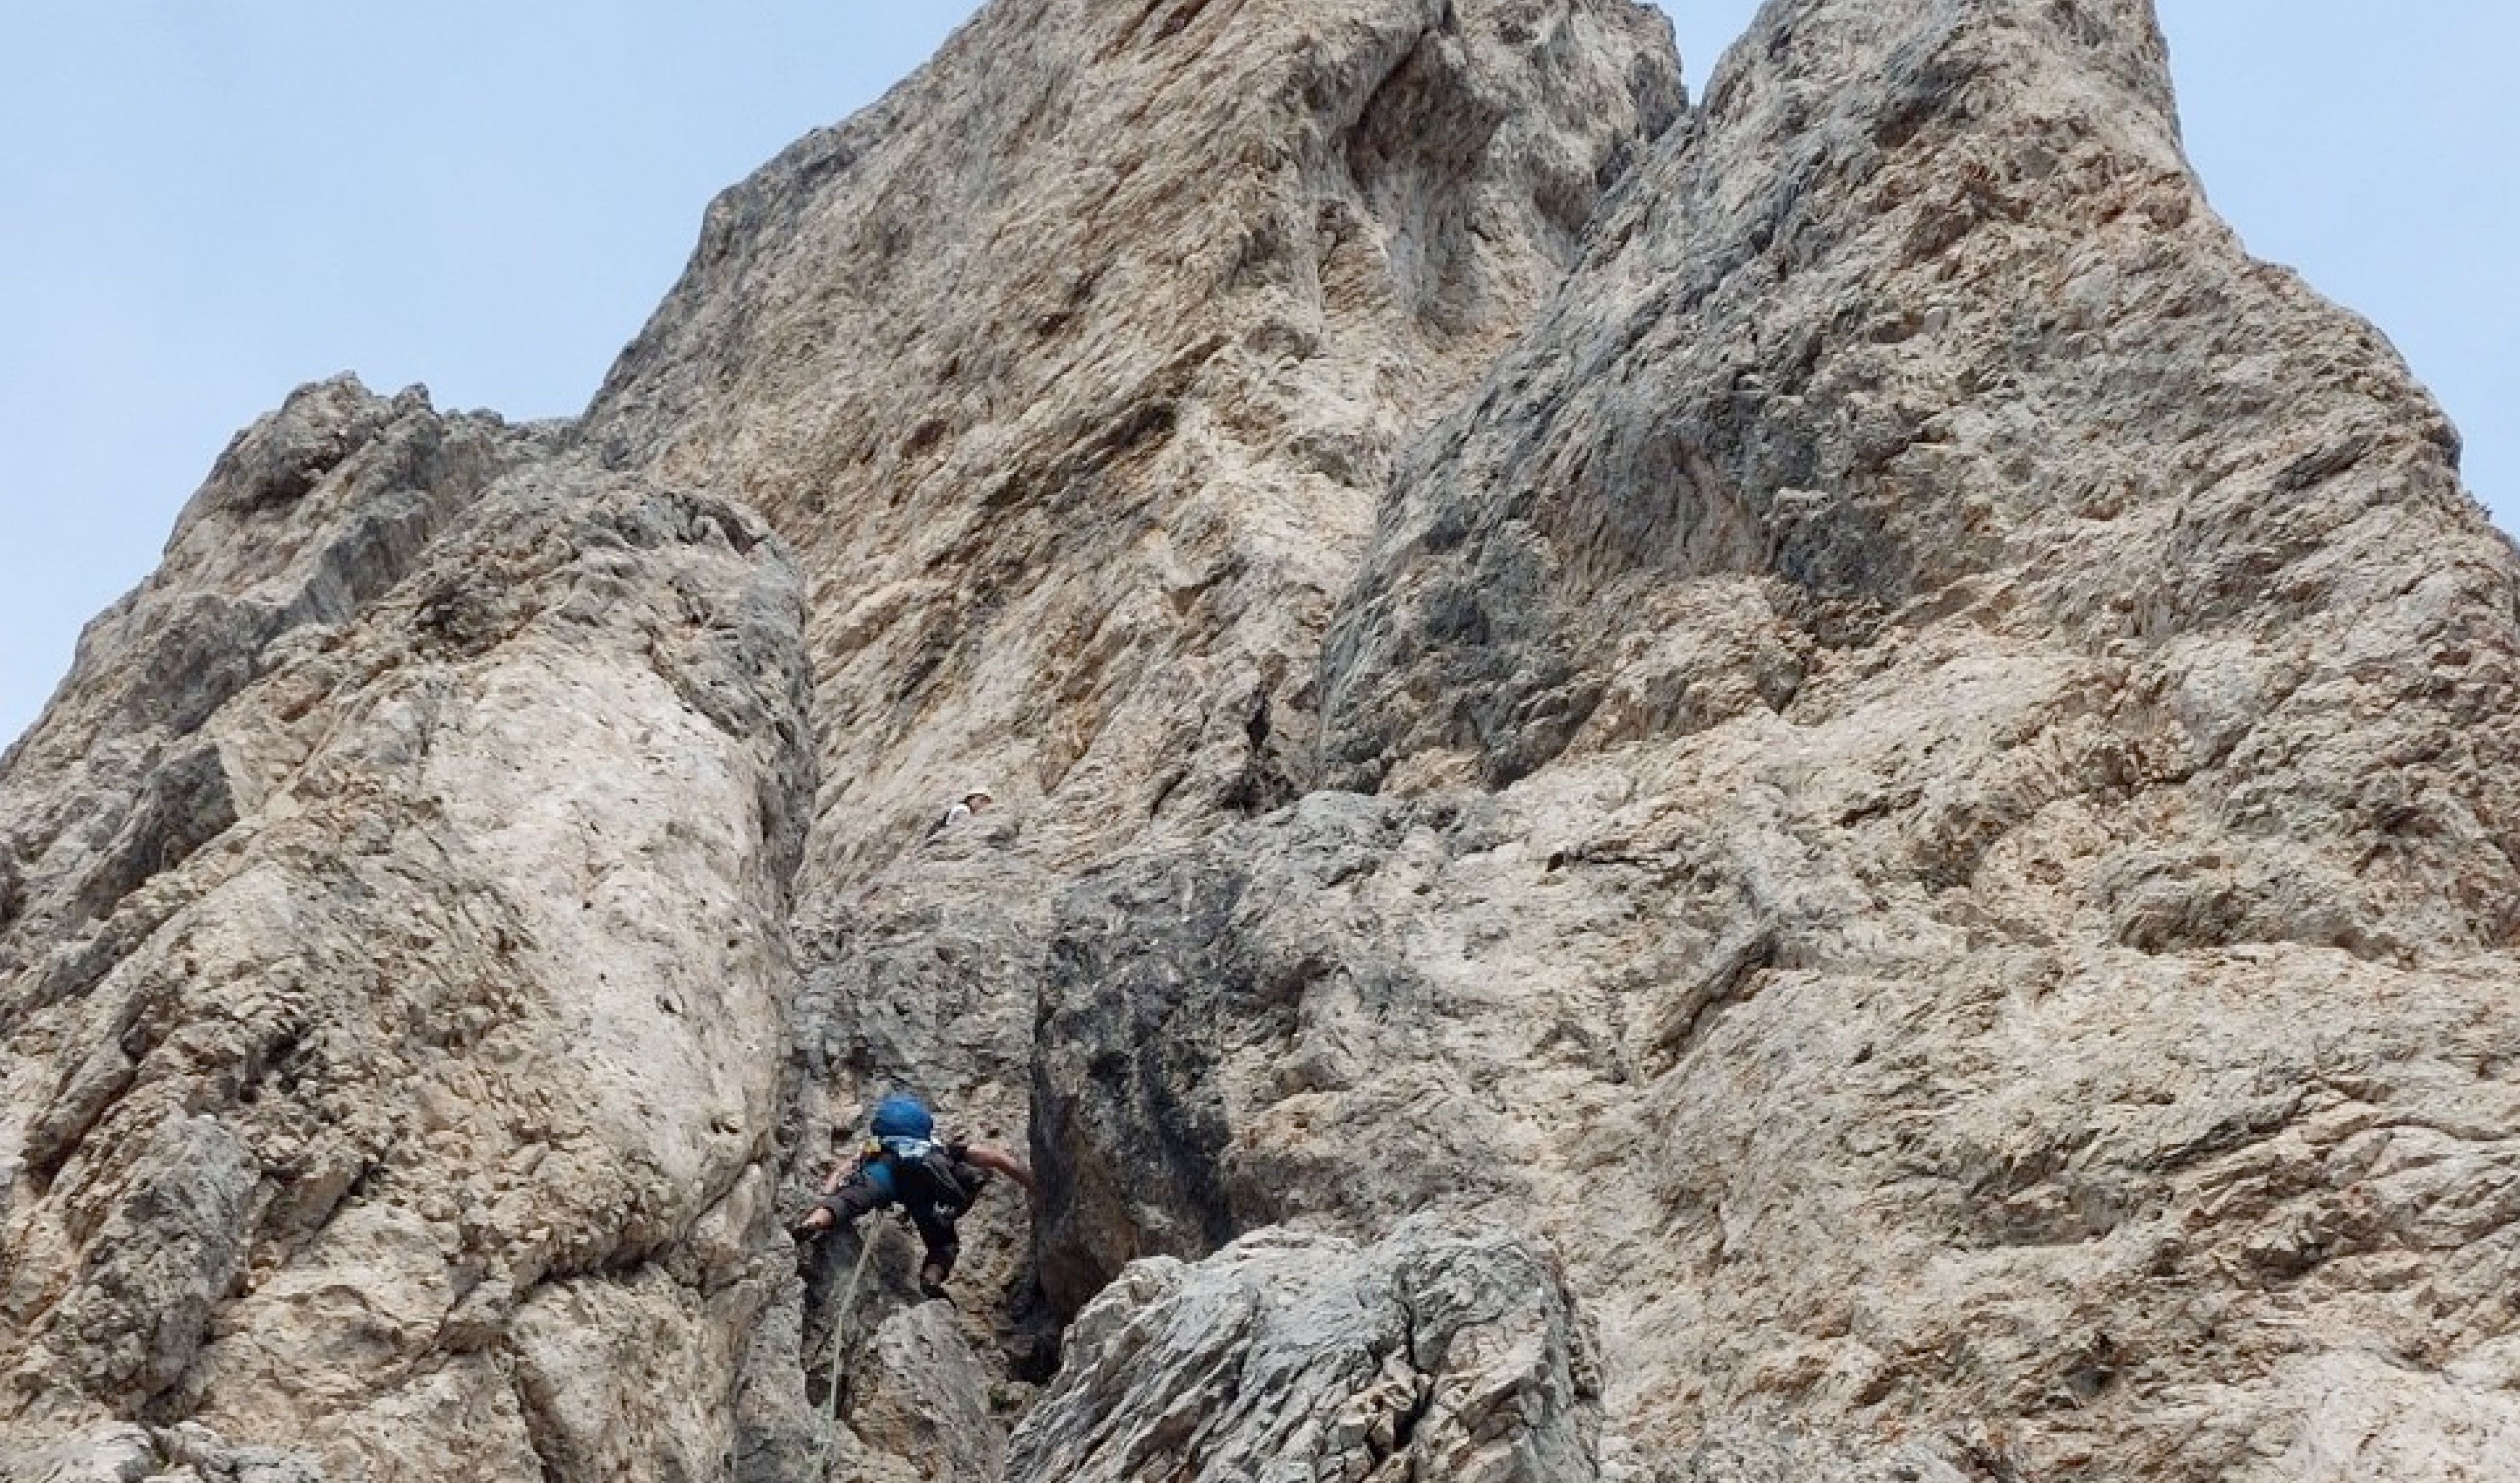 Students climbing in Italy